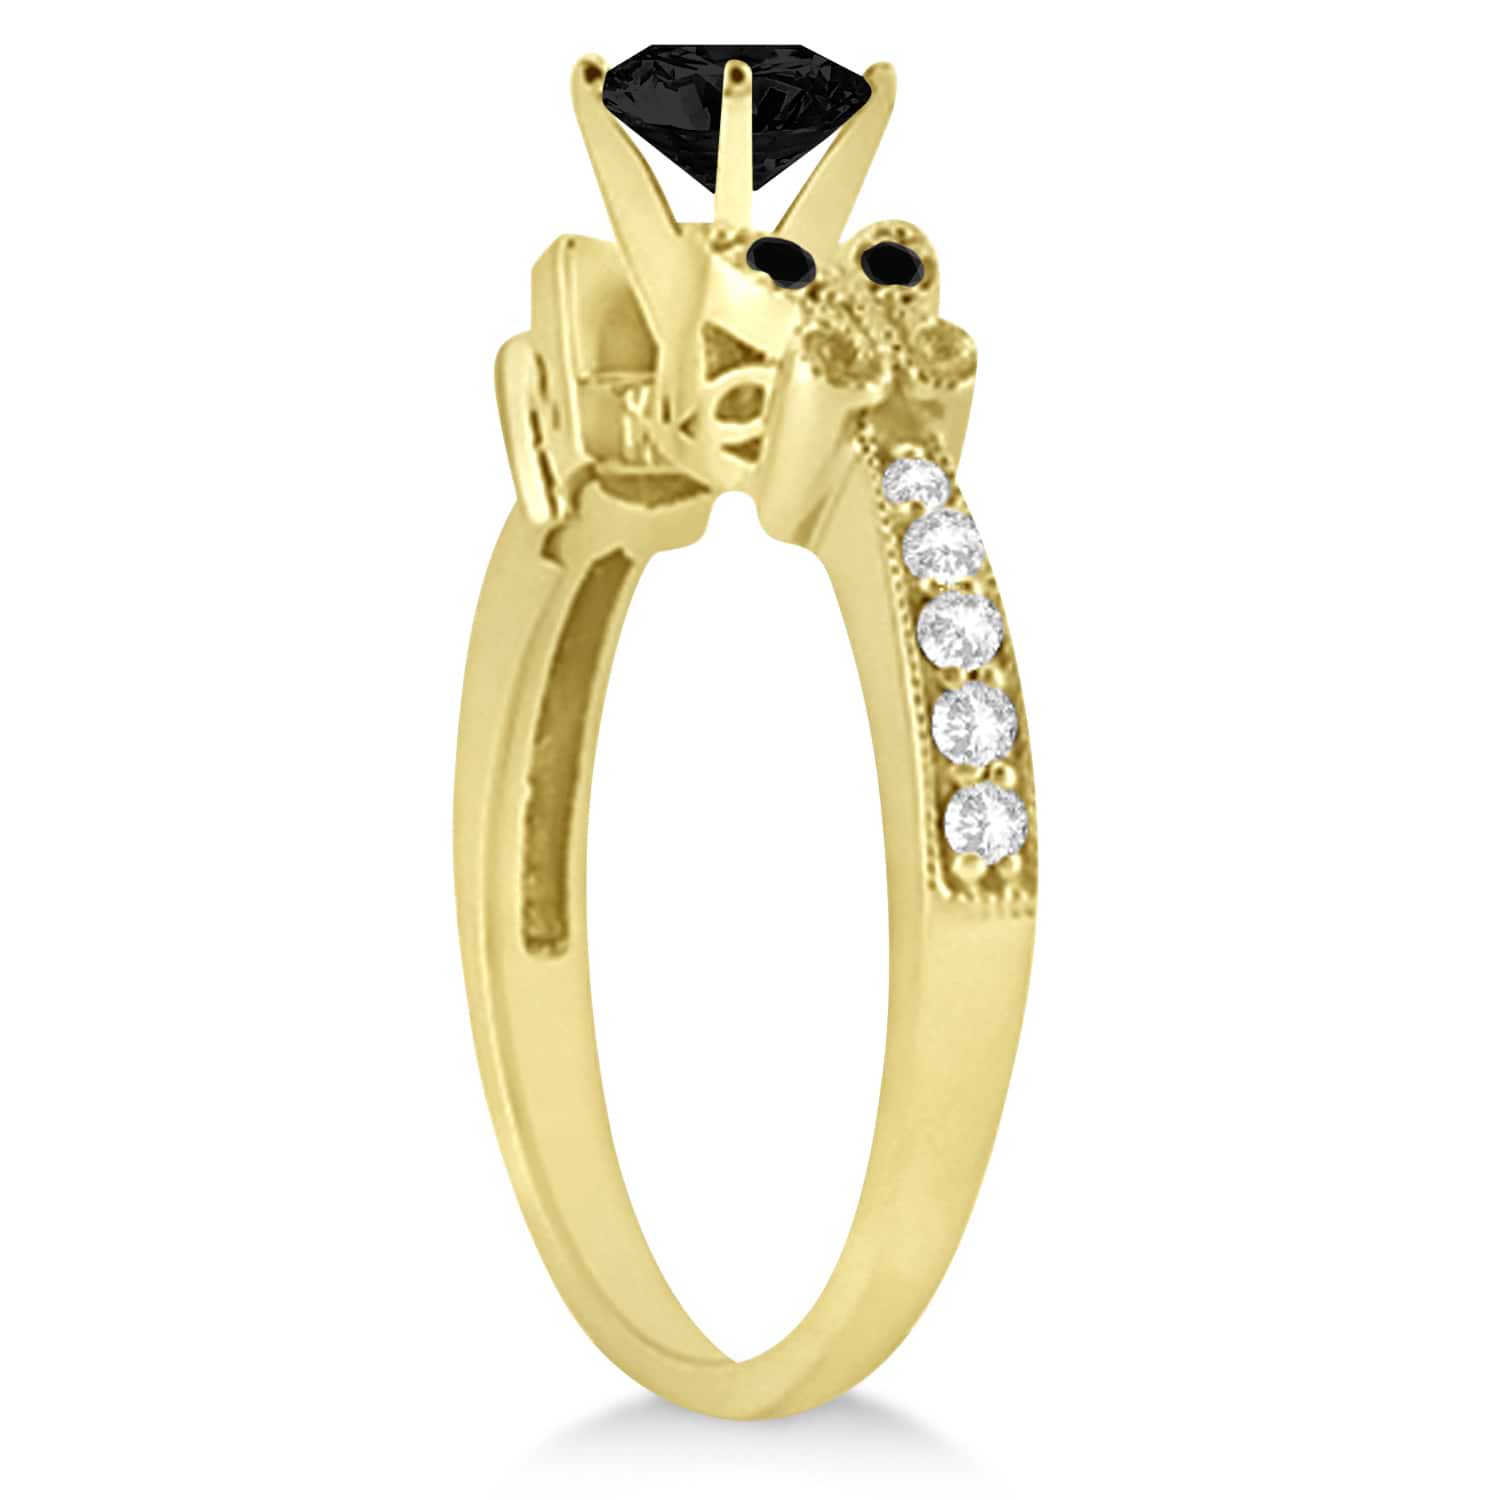 Butterfly White & Black Diamond Engagement Ring 18K Yellow Gold 0.67ct